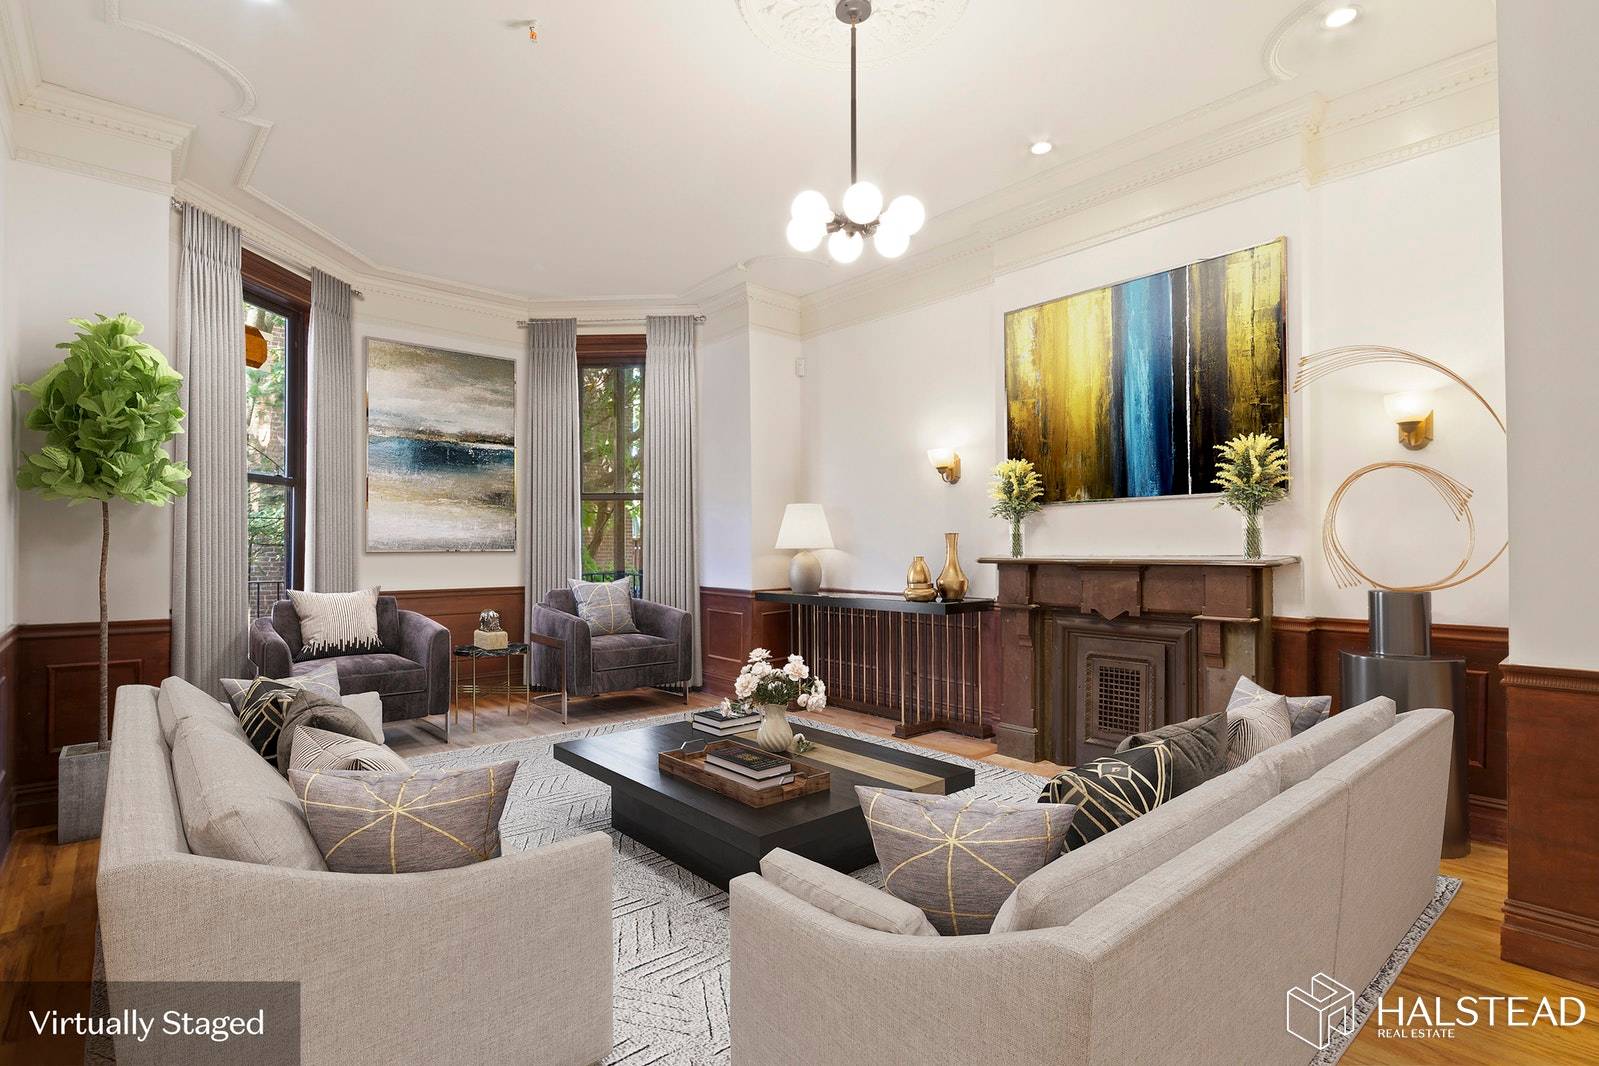 EASY TO SHOW BY APPOINTMENTSet on the border of Fort Greene and historic Clinton Hill, this fully renovated five story, four family brownstone will appeal to either the savvy investor ...